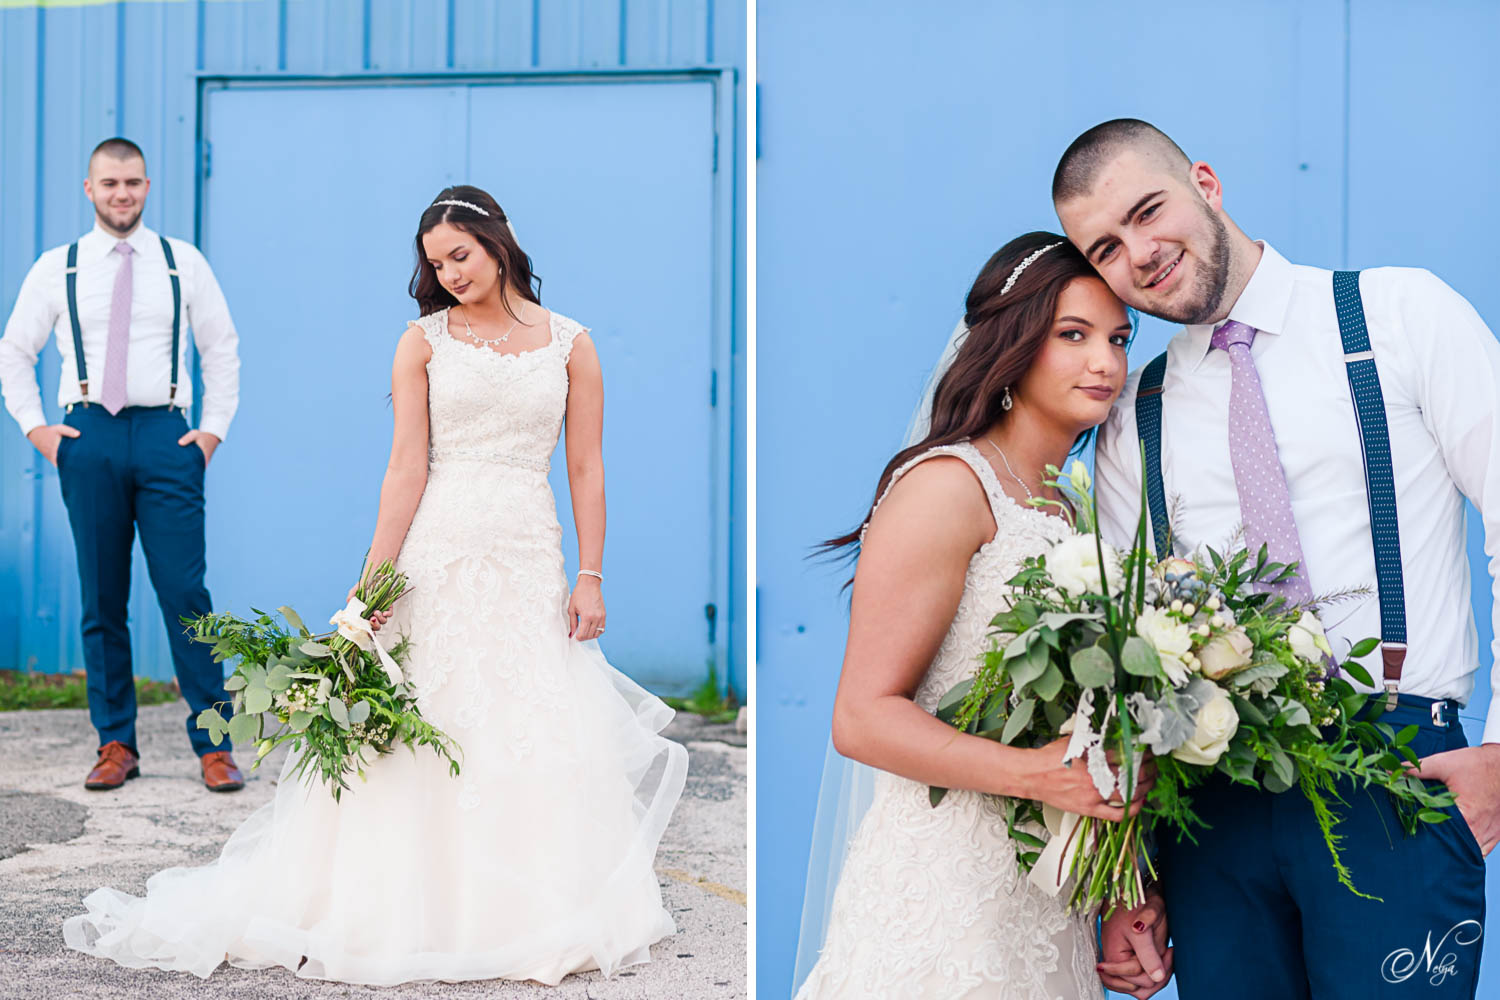 bride standing holding her bouquet and groom in the background admiring her. And wedding couple portrait in front of bright blue wall in Knoxville TN.